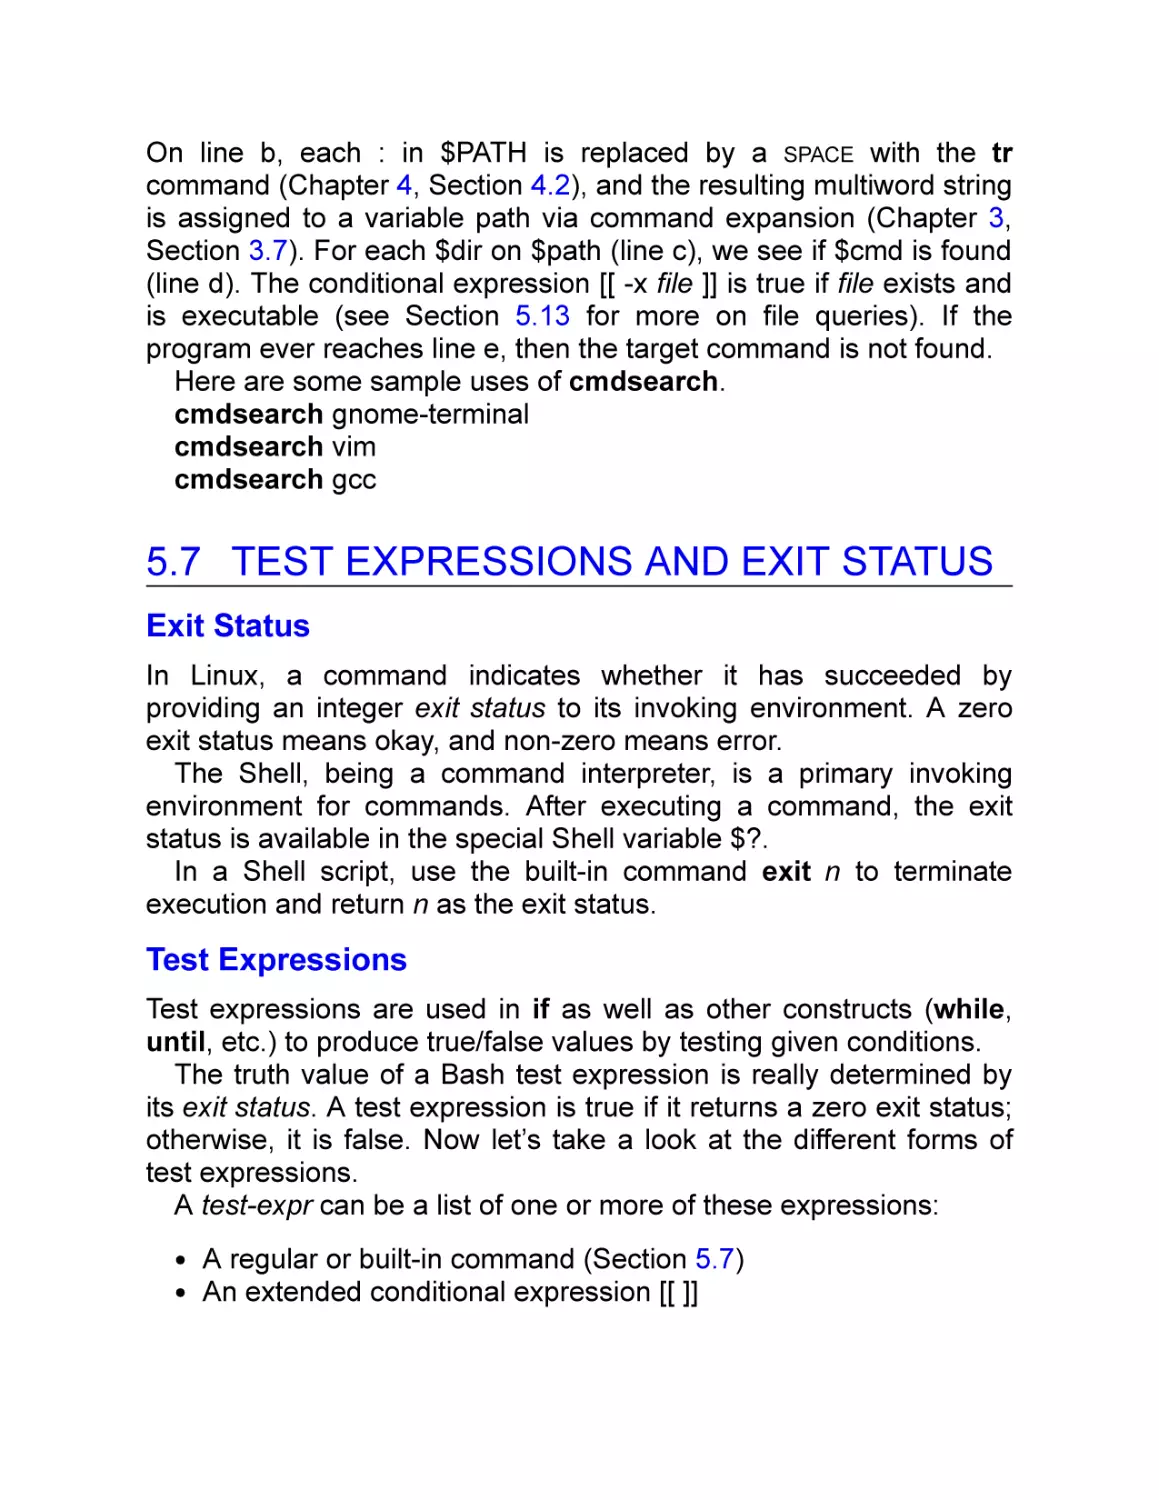 5.7 Test Expressions and Exit Status
Exit Status
Test Expressions